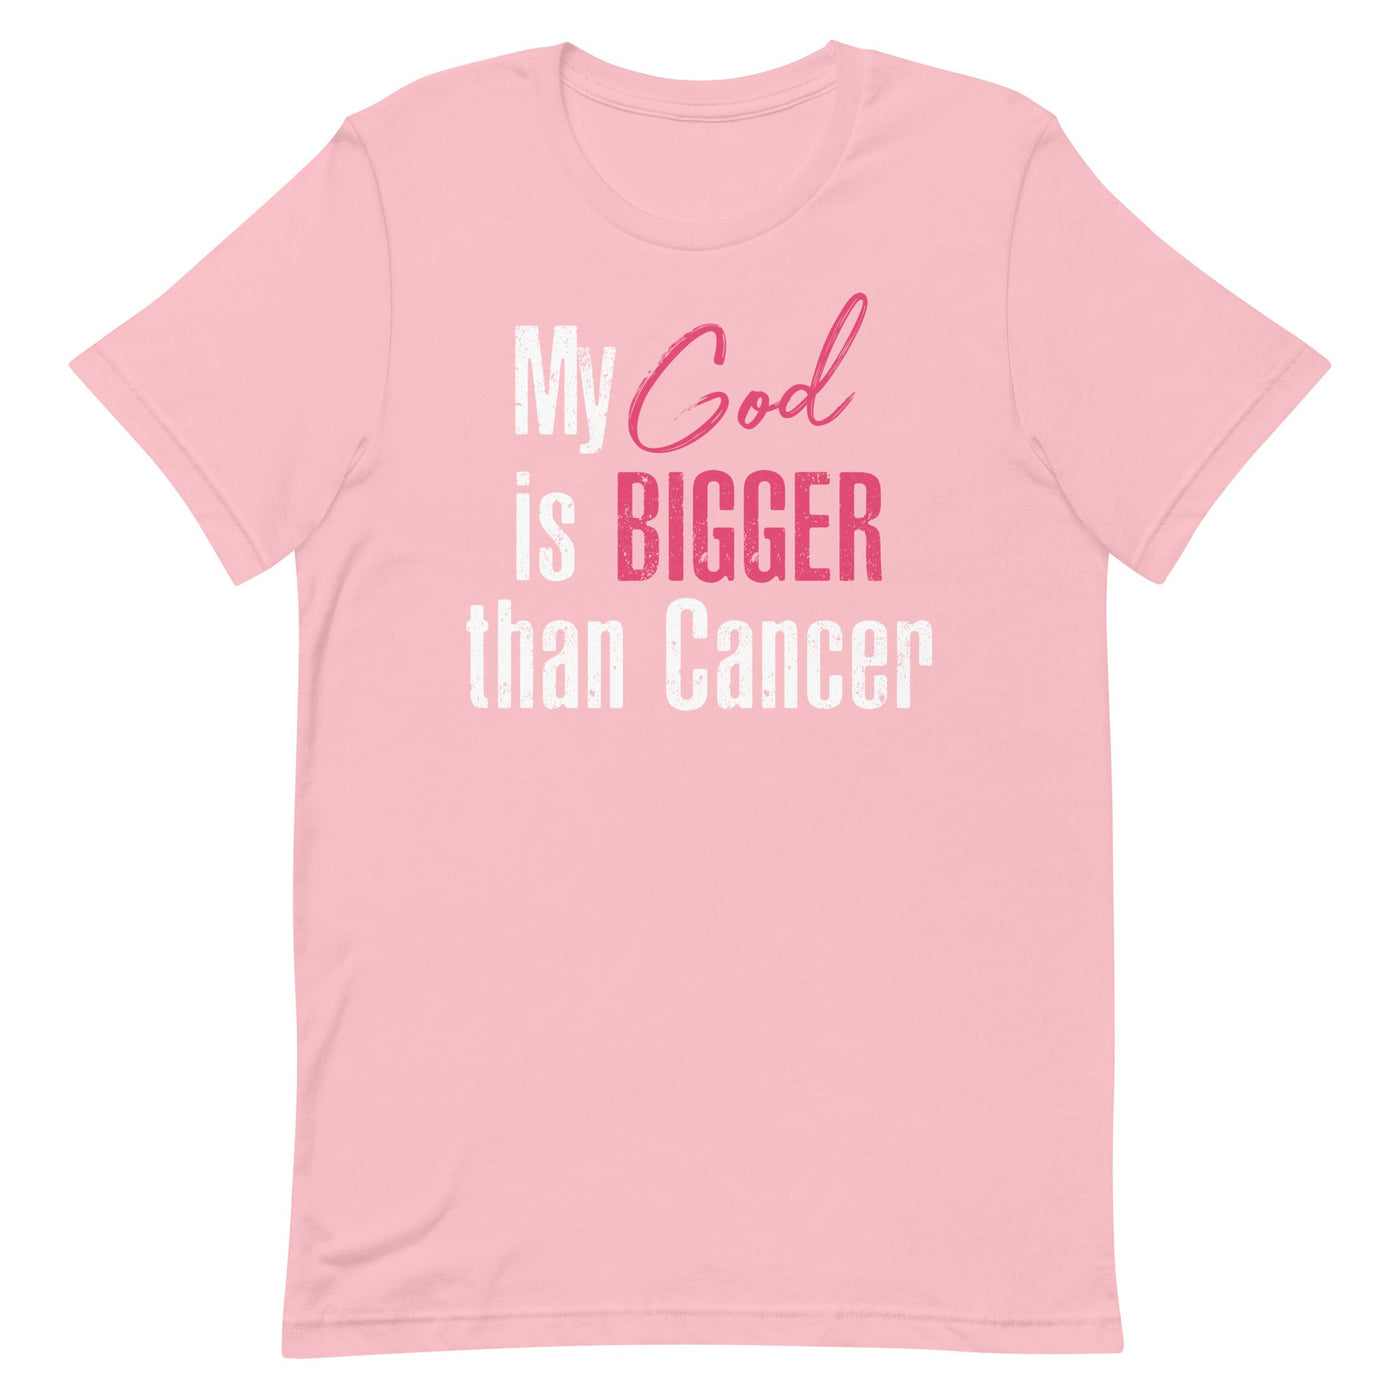 MY GOD IS BIGGER THAN CANCER WOMEN'S SHIRT - WHITE AND PINK FONT Pink S 